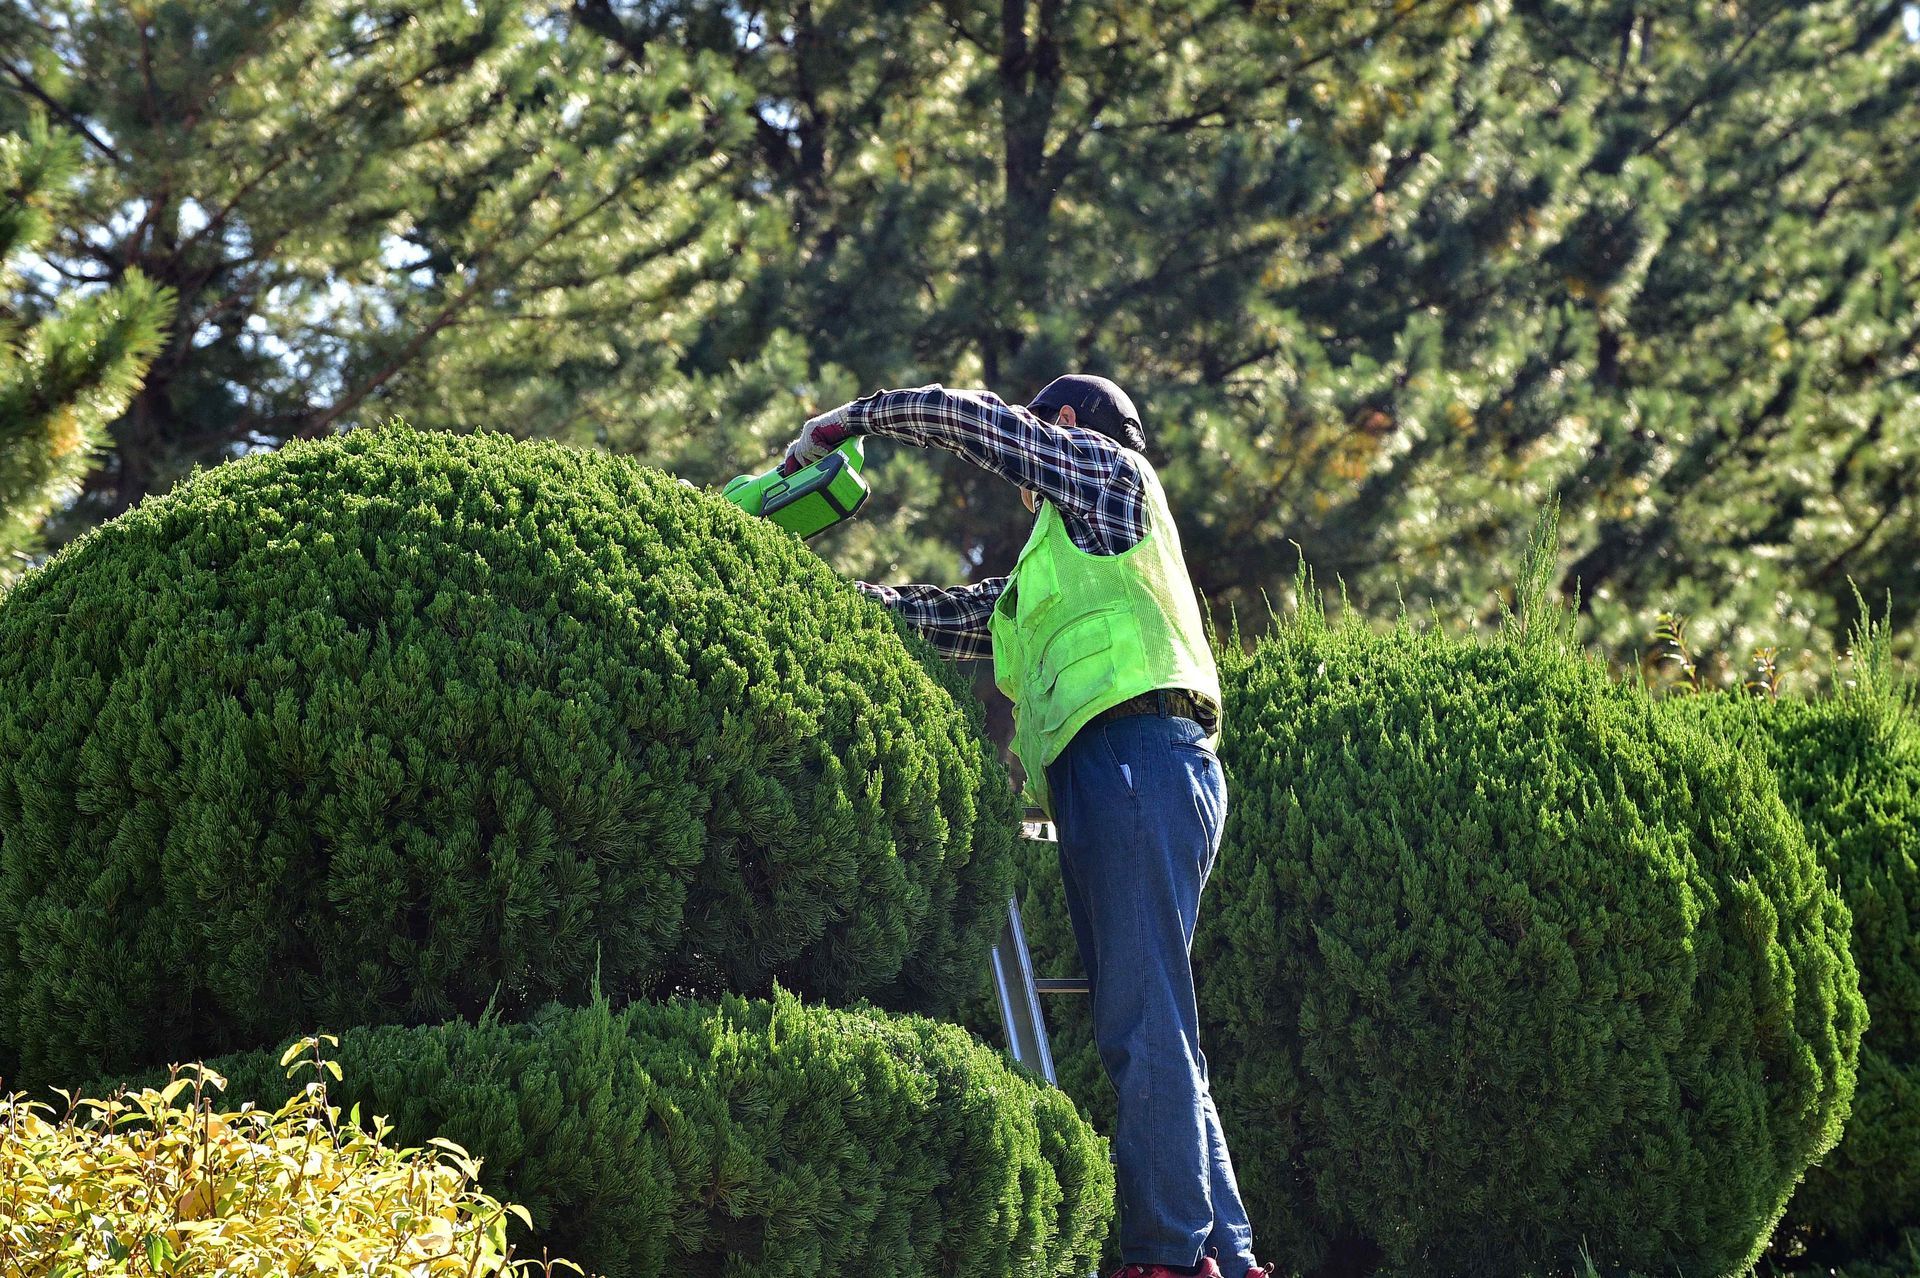 Trimming hedges